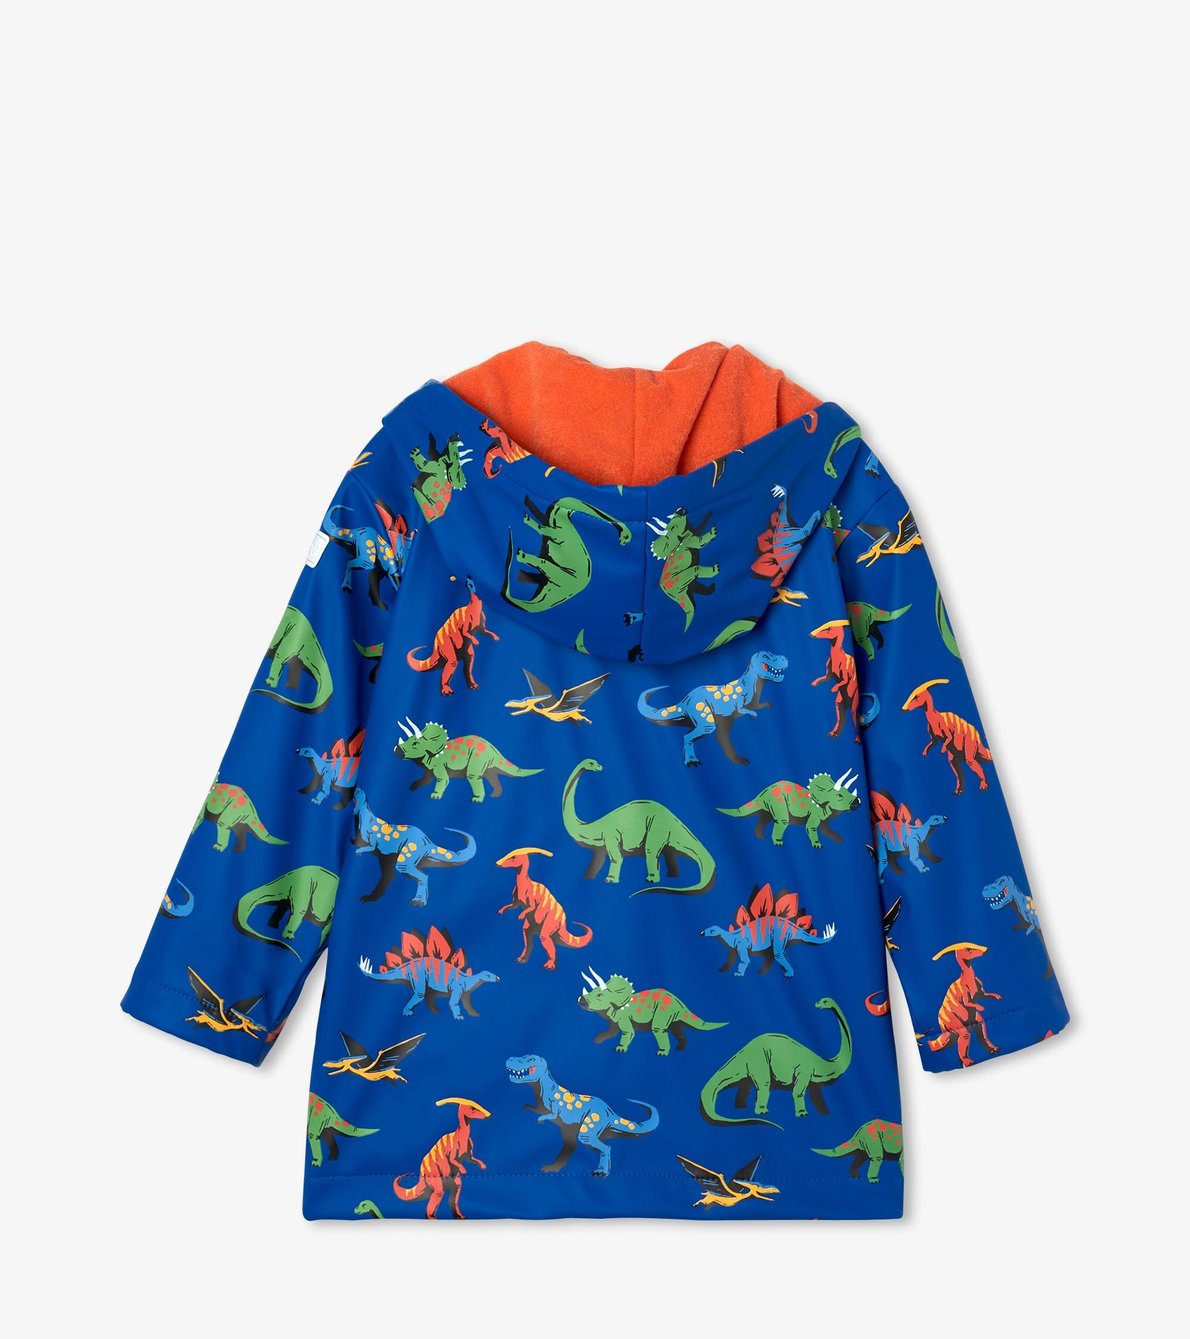 View larger image of Friendly Dinos Raincoat